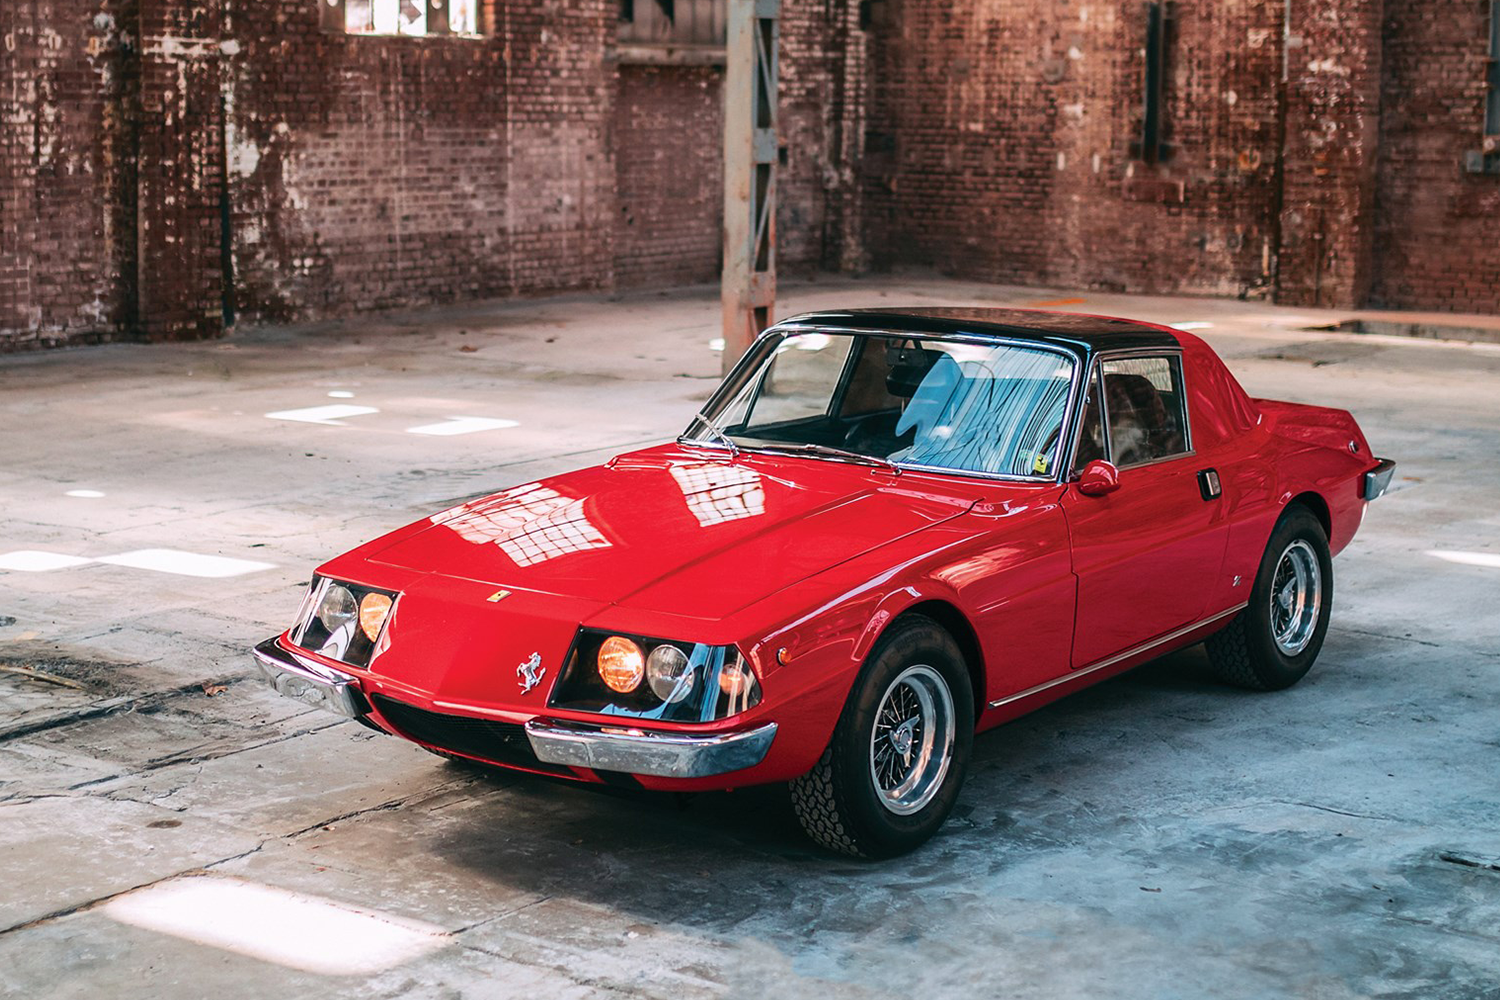 This one-off 1967 Ferrari 330 GTC Zagato is up for auction in May.